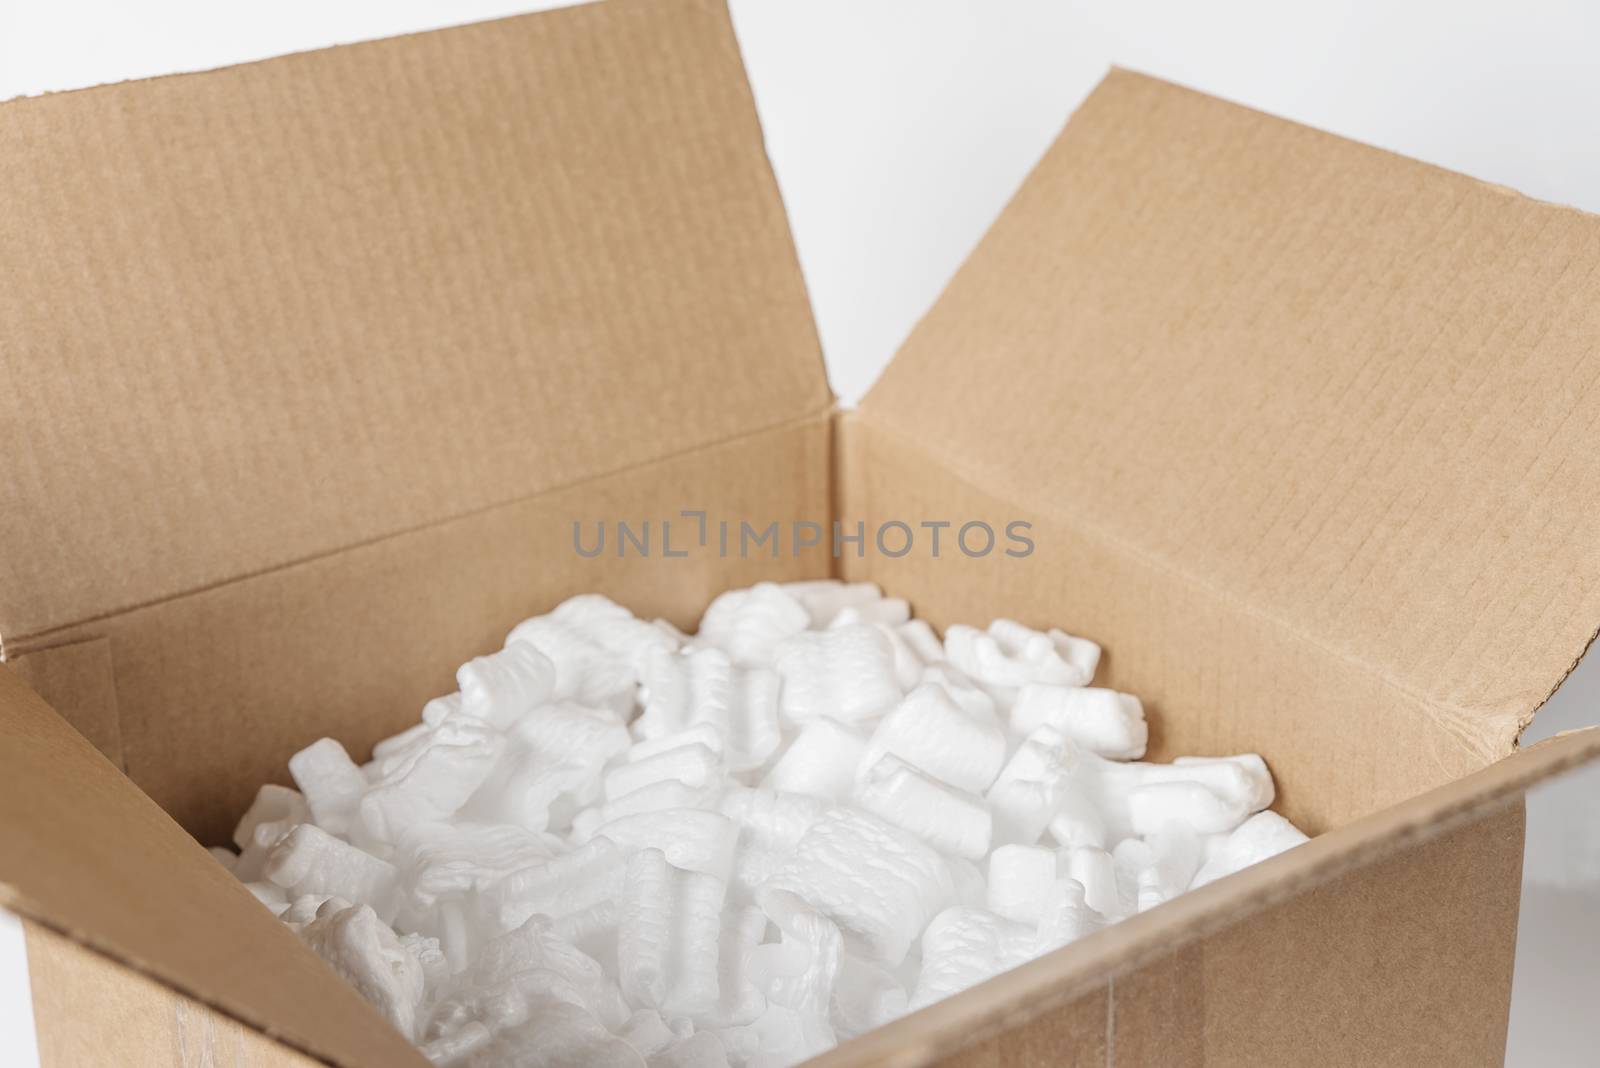 Opened cardboard box filled with polystyrene foam chips on a white background close-up